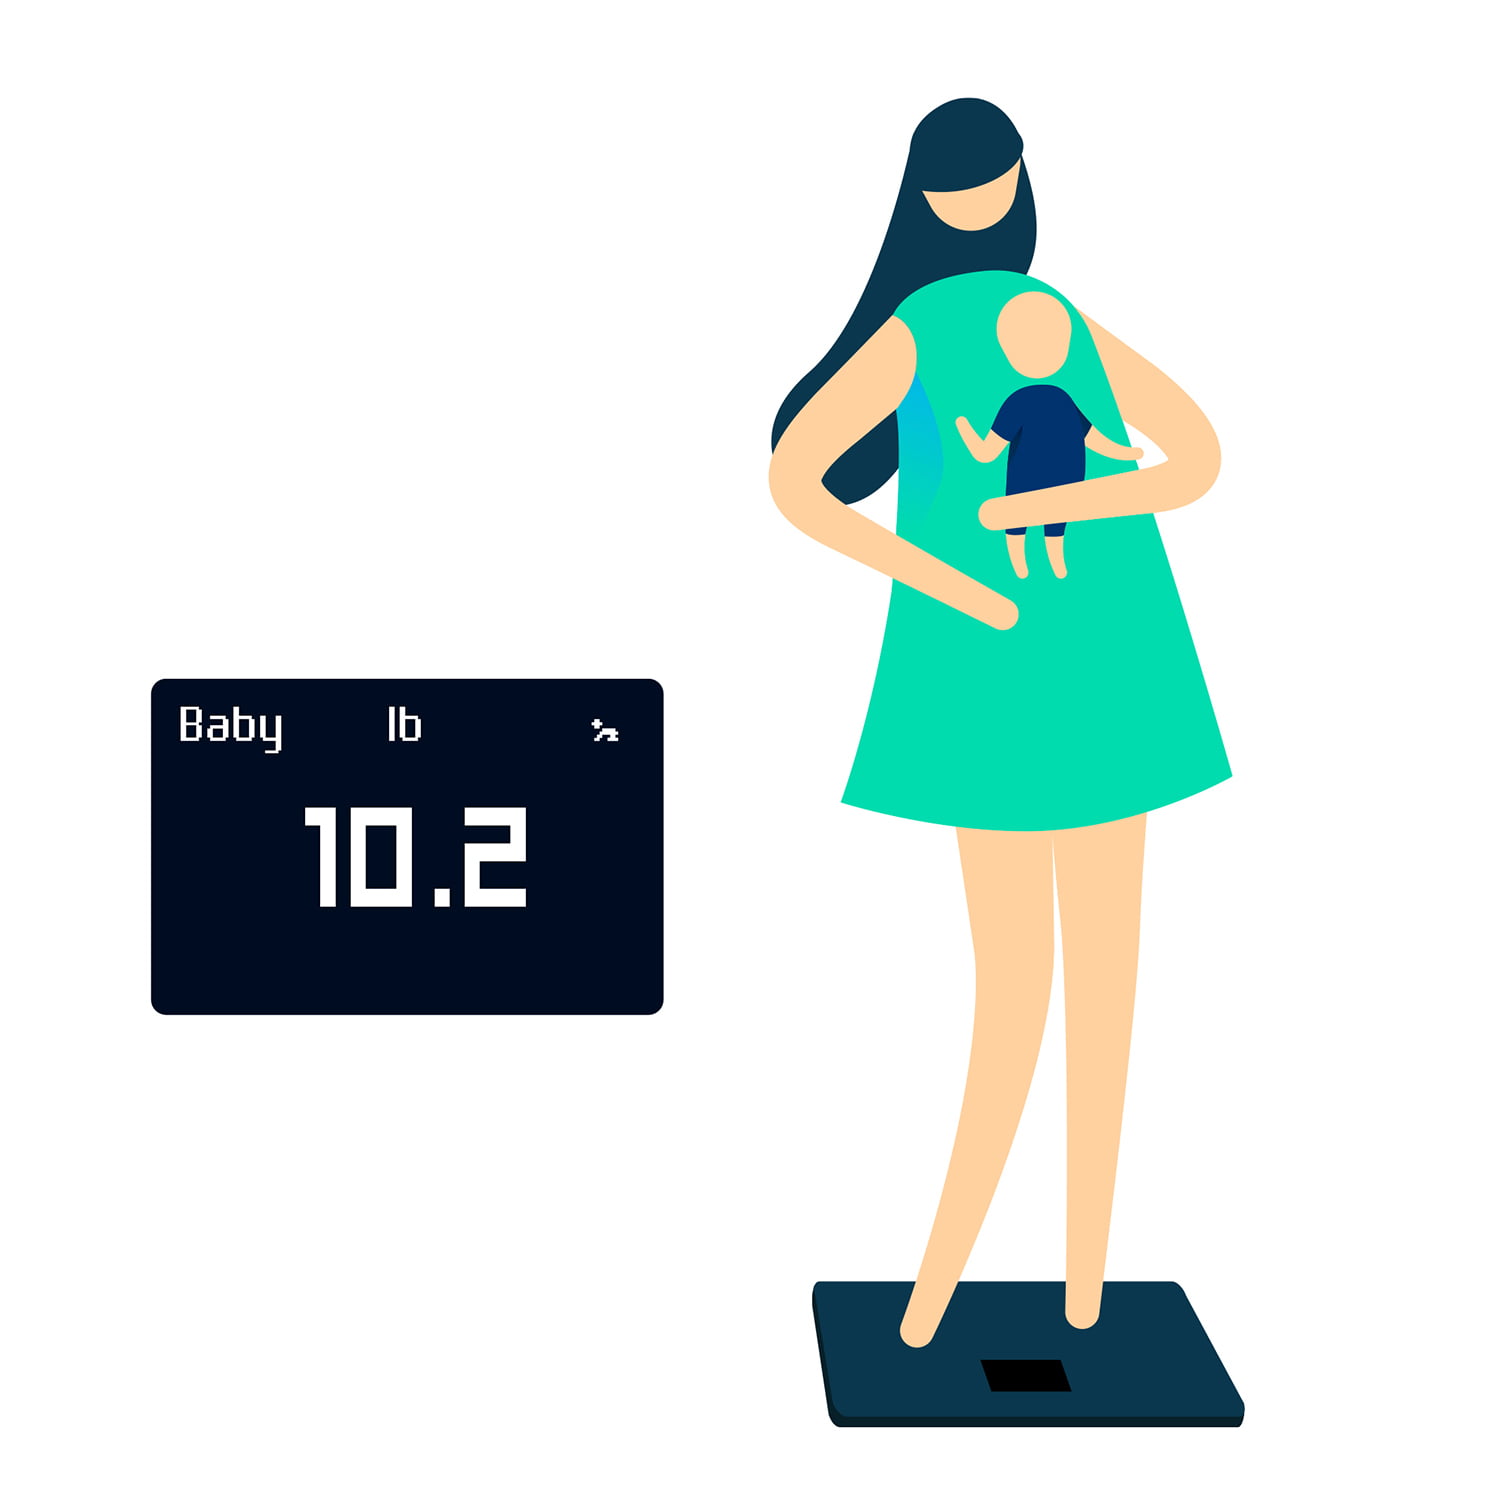 Withings Body - Weight & BMI Wi-Fi Scale 